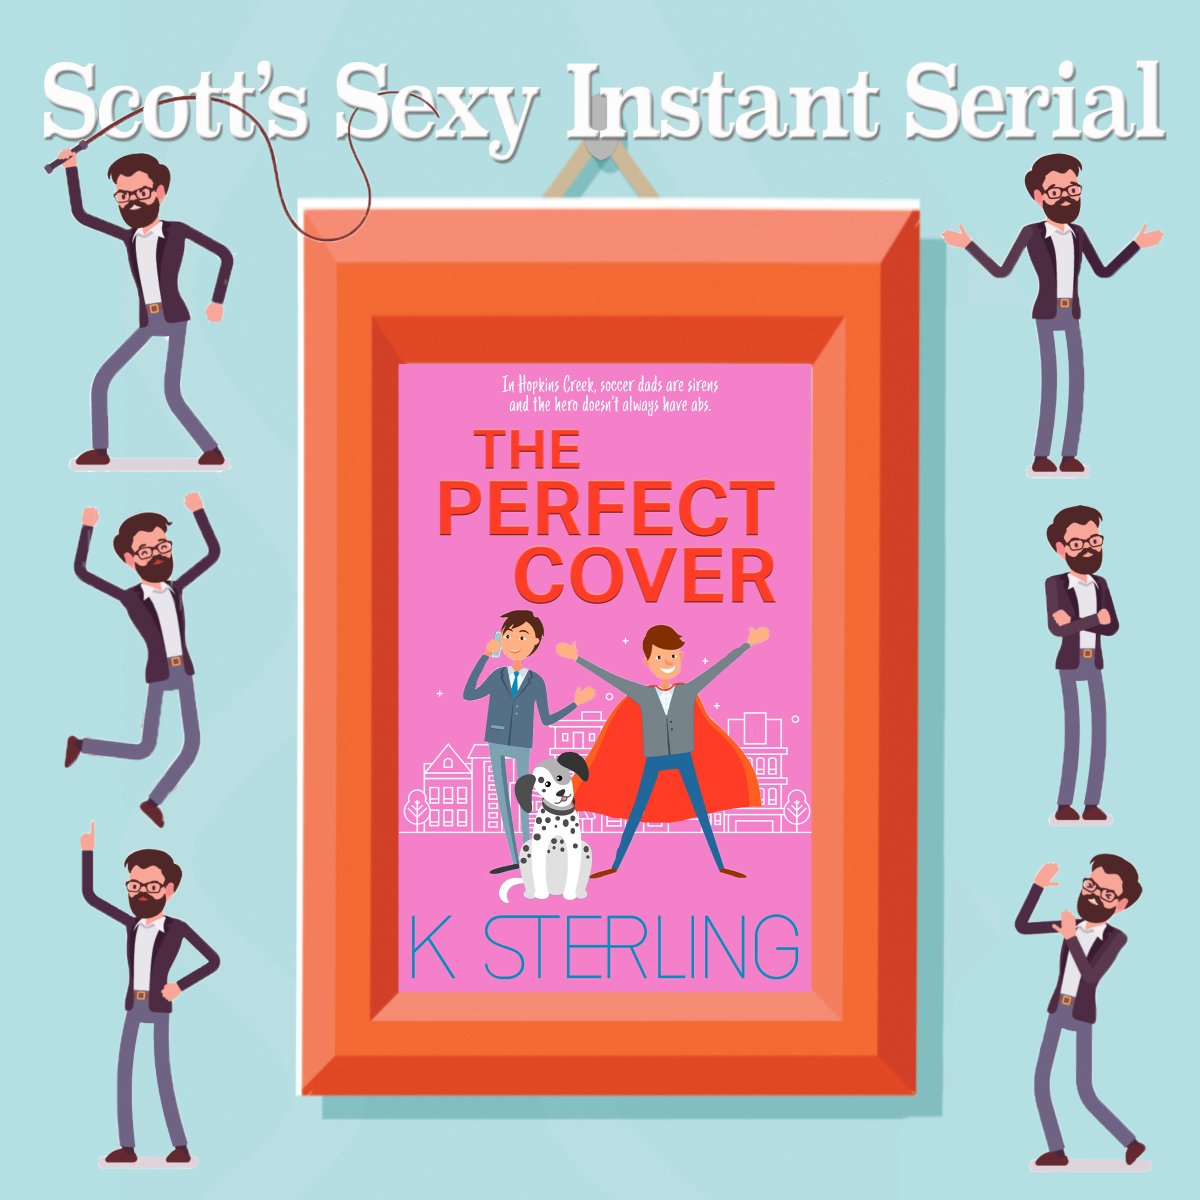 @EvieDrae Join us for Scott's Sexy Instant Serial and listen to The Perfect Cover for FREE! We're up to ch 11 and a new episode arrives this week!
Listen NOW!: soundcloud.com/user-321457733…
#audiobooks #podcast #RomanceReaders #romance #lgbtqwrites #gayromance #mmromance #mm #romanceaudiobooks